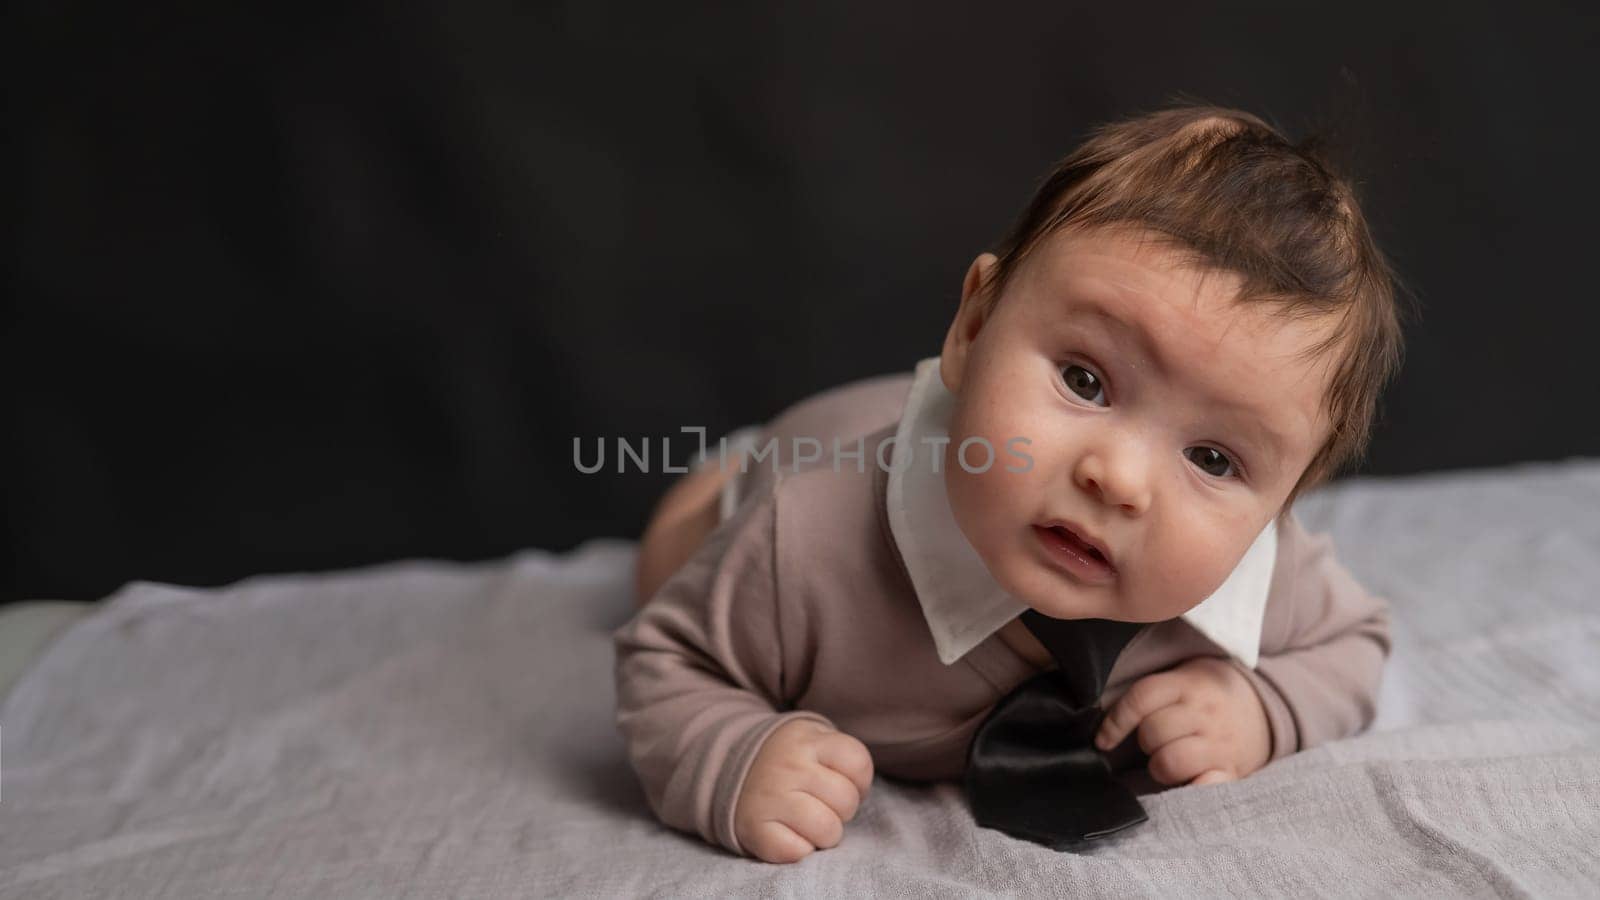 Portrait of a baby lying on his stomach wearing a tie on a black background. by mrwed54